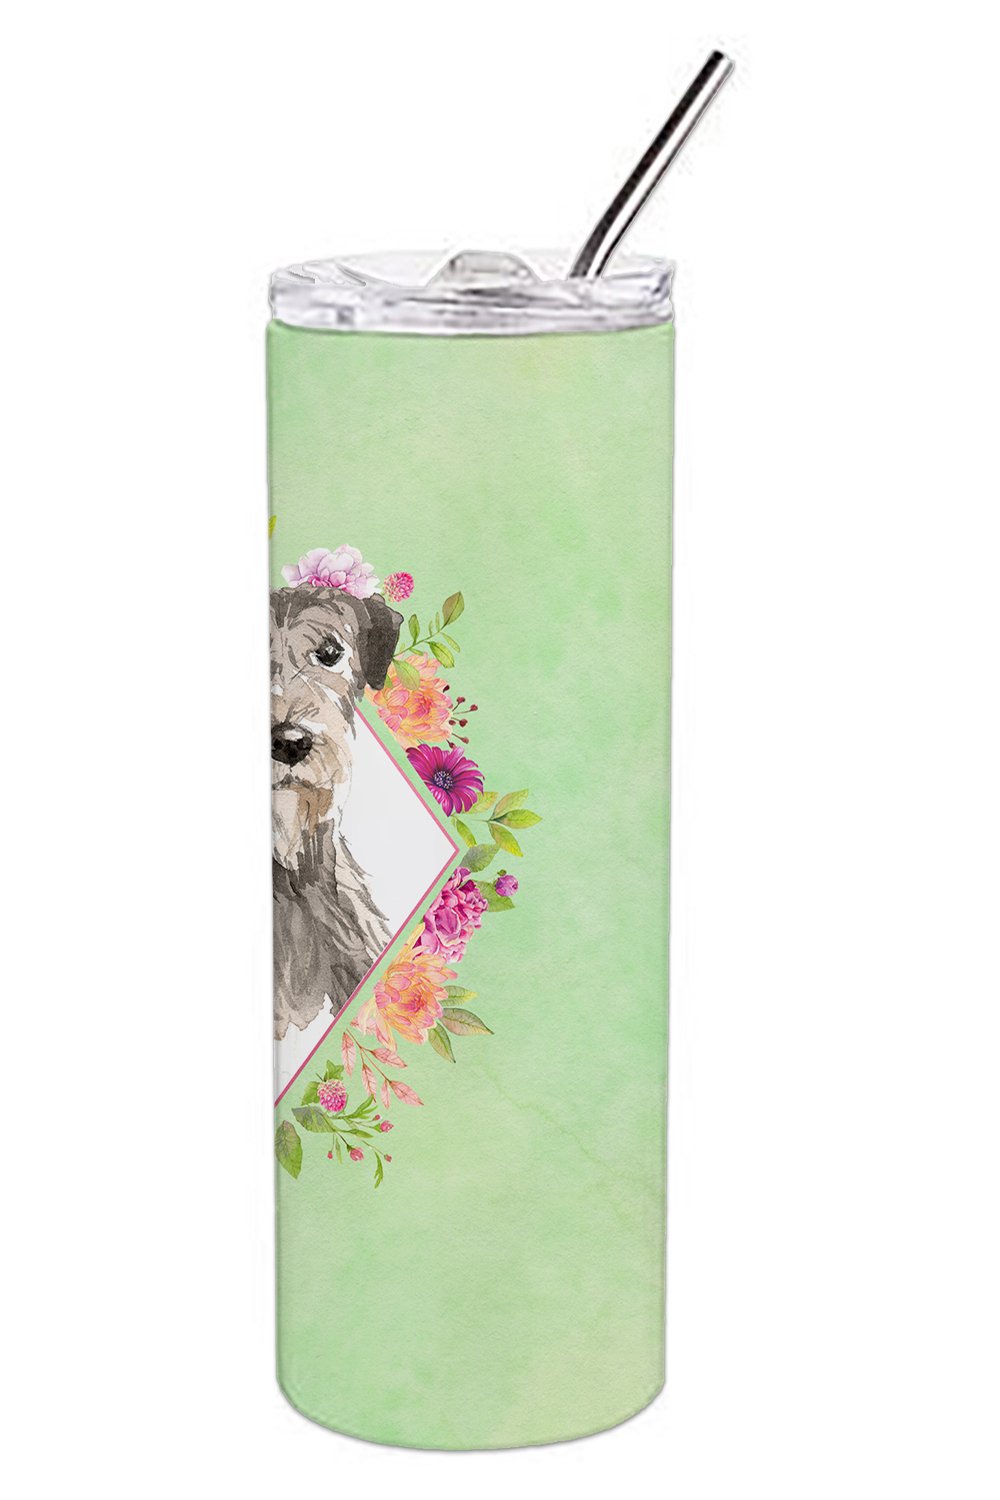 Irish Wolfhound Green Flowers Double Walled Stainless Steel 20 oz Skinny Tumbler CK4391TBL20 by Caroline's Treasures